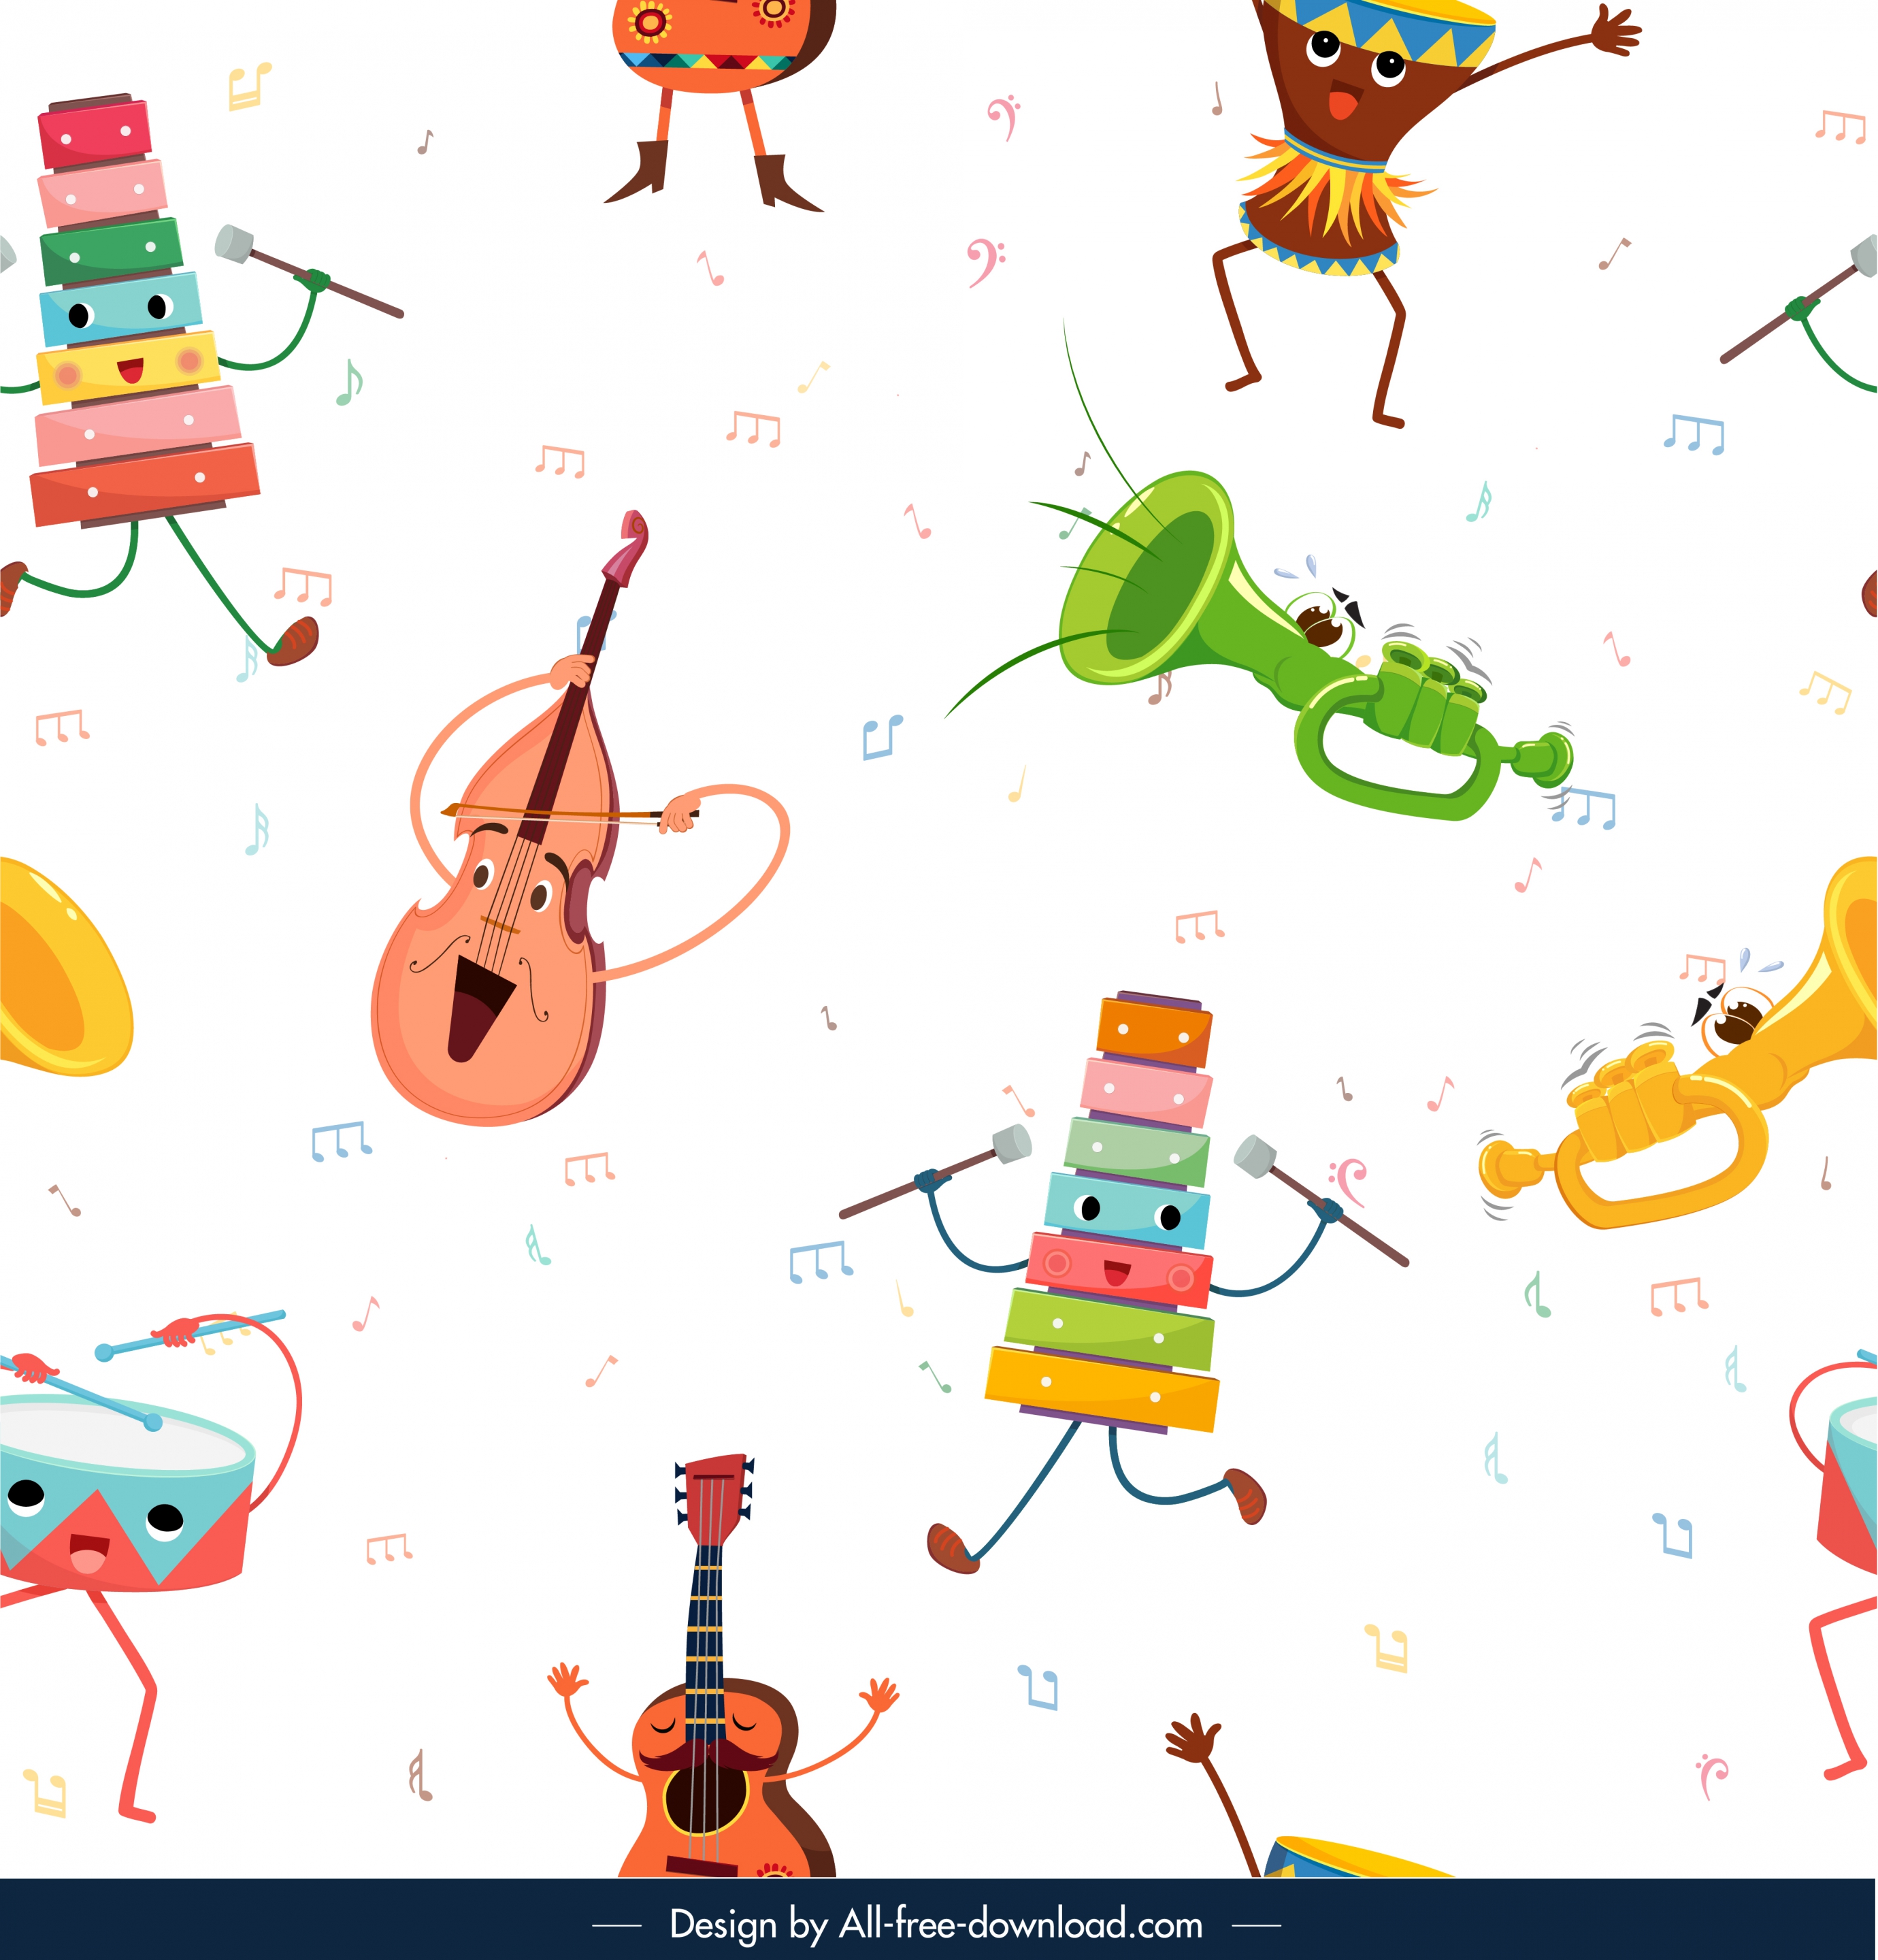 Friendly personified musical instruments dancing among musical notes